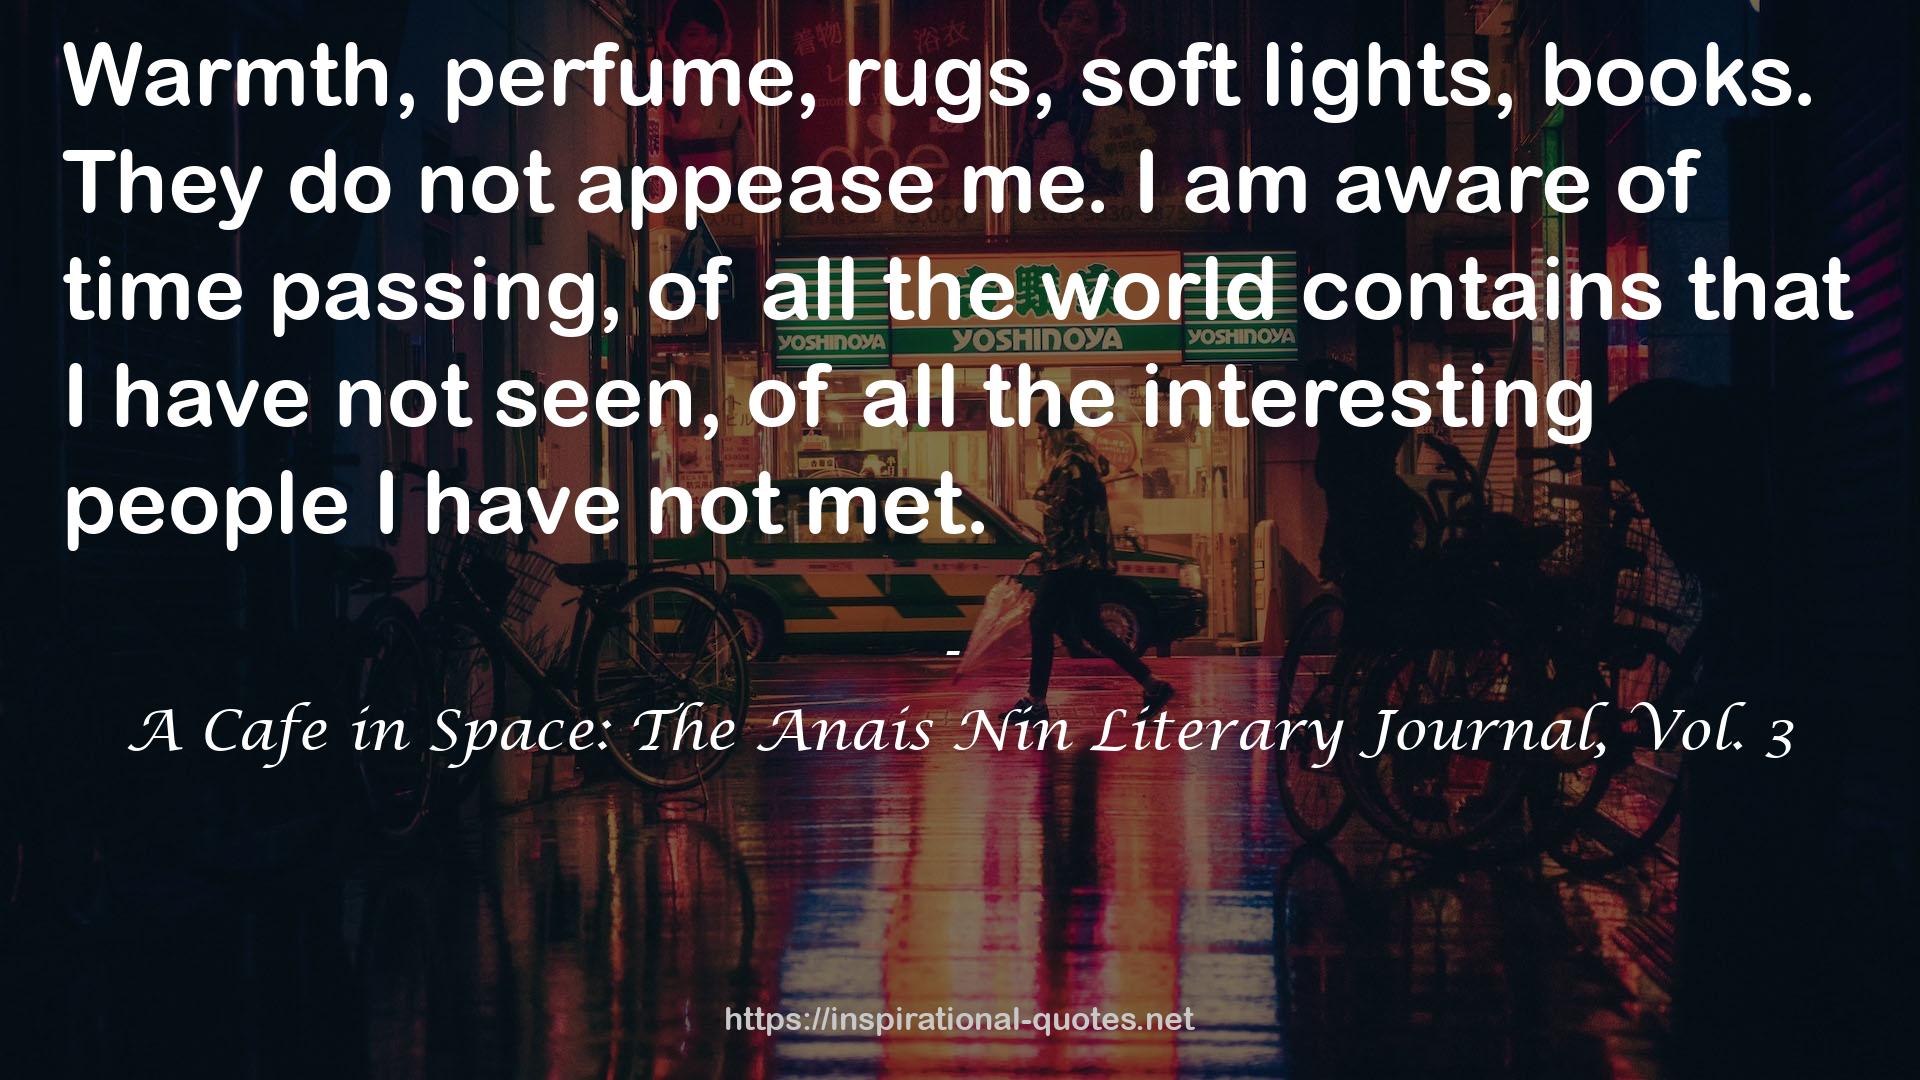 A Cafe in Space: The Anais Nin Literary Journal, Vol. 3 QUOTES